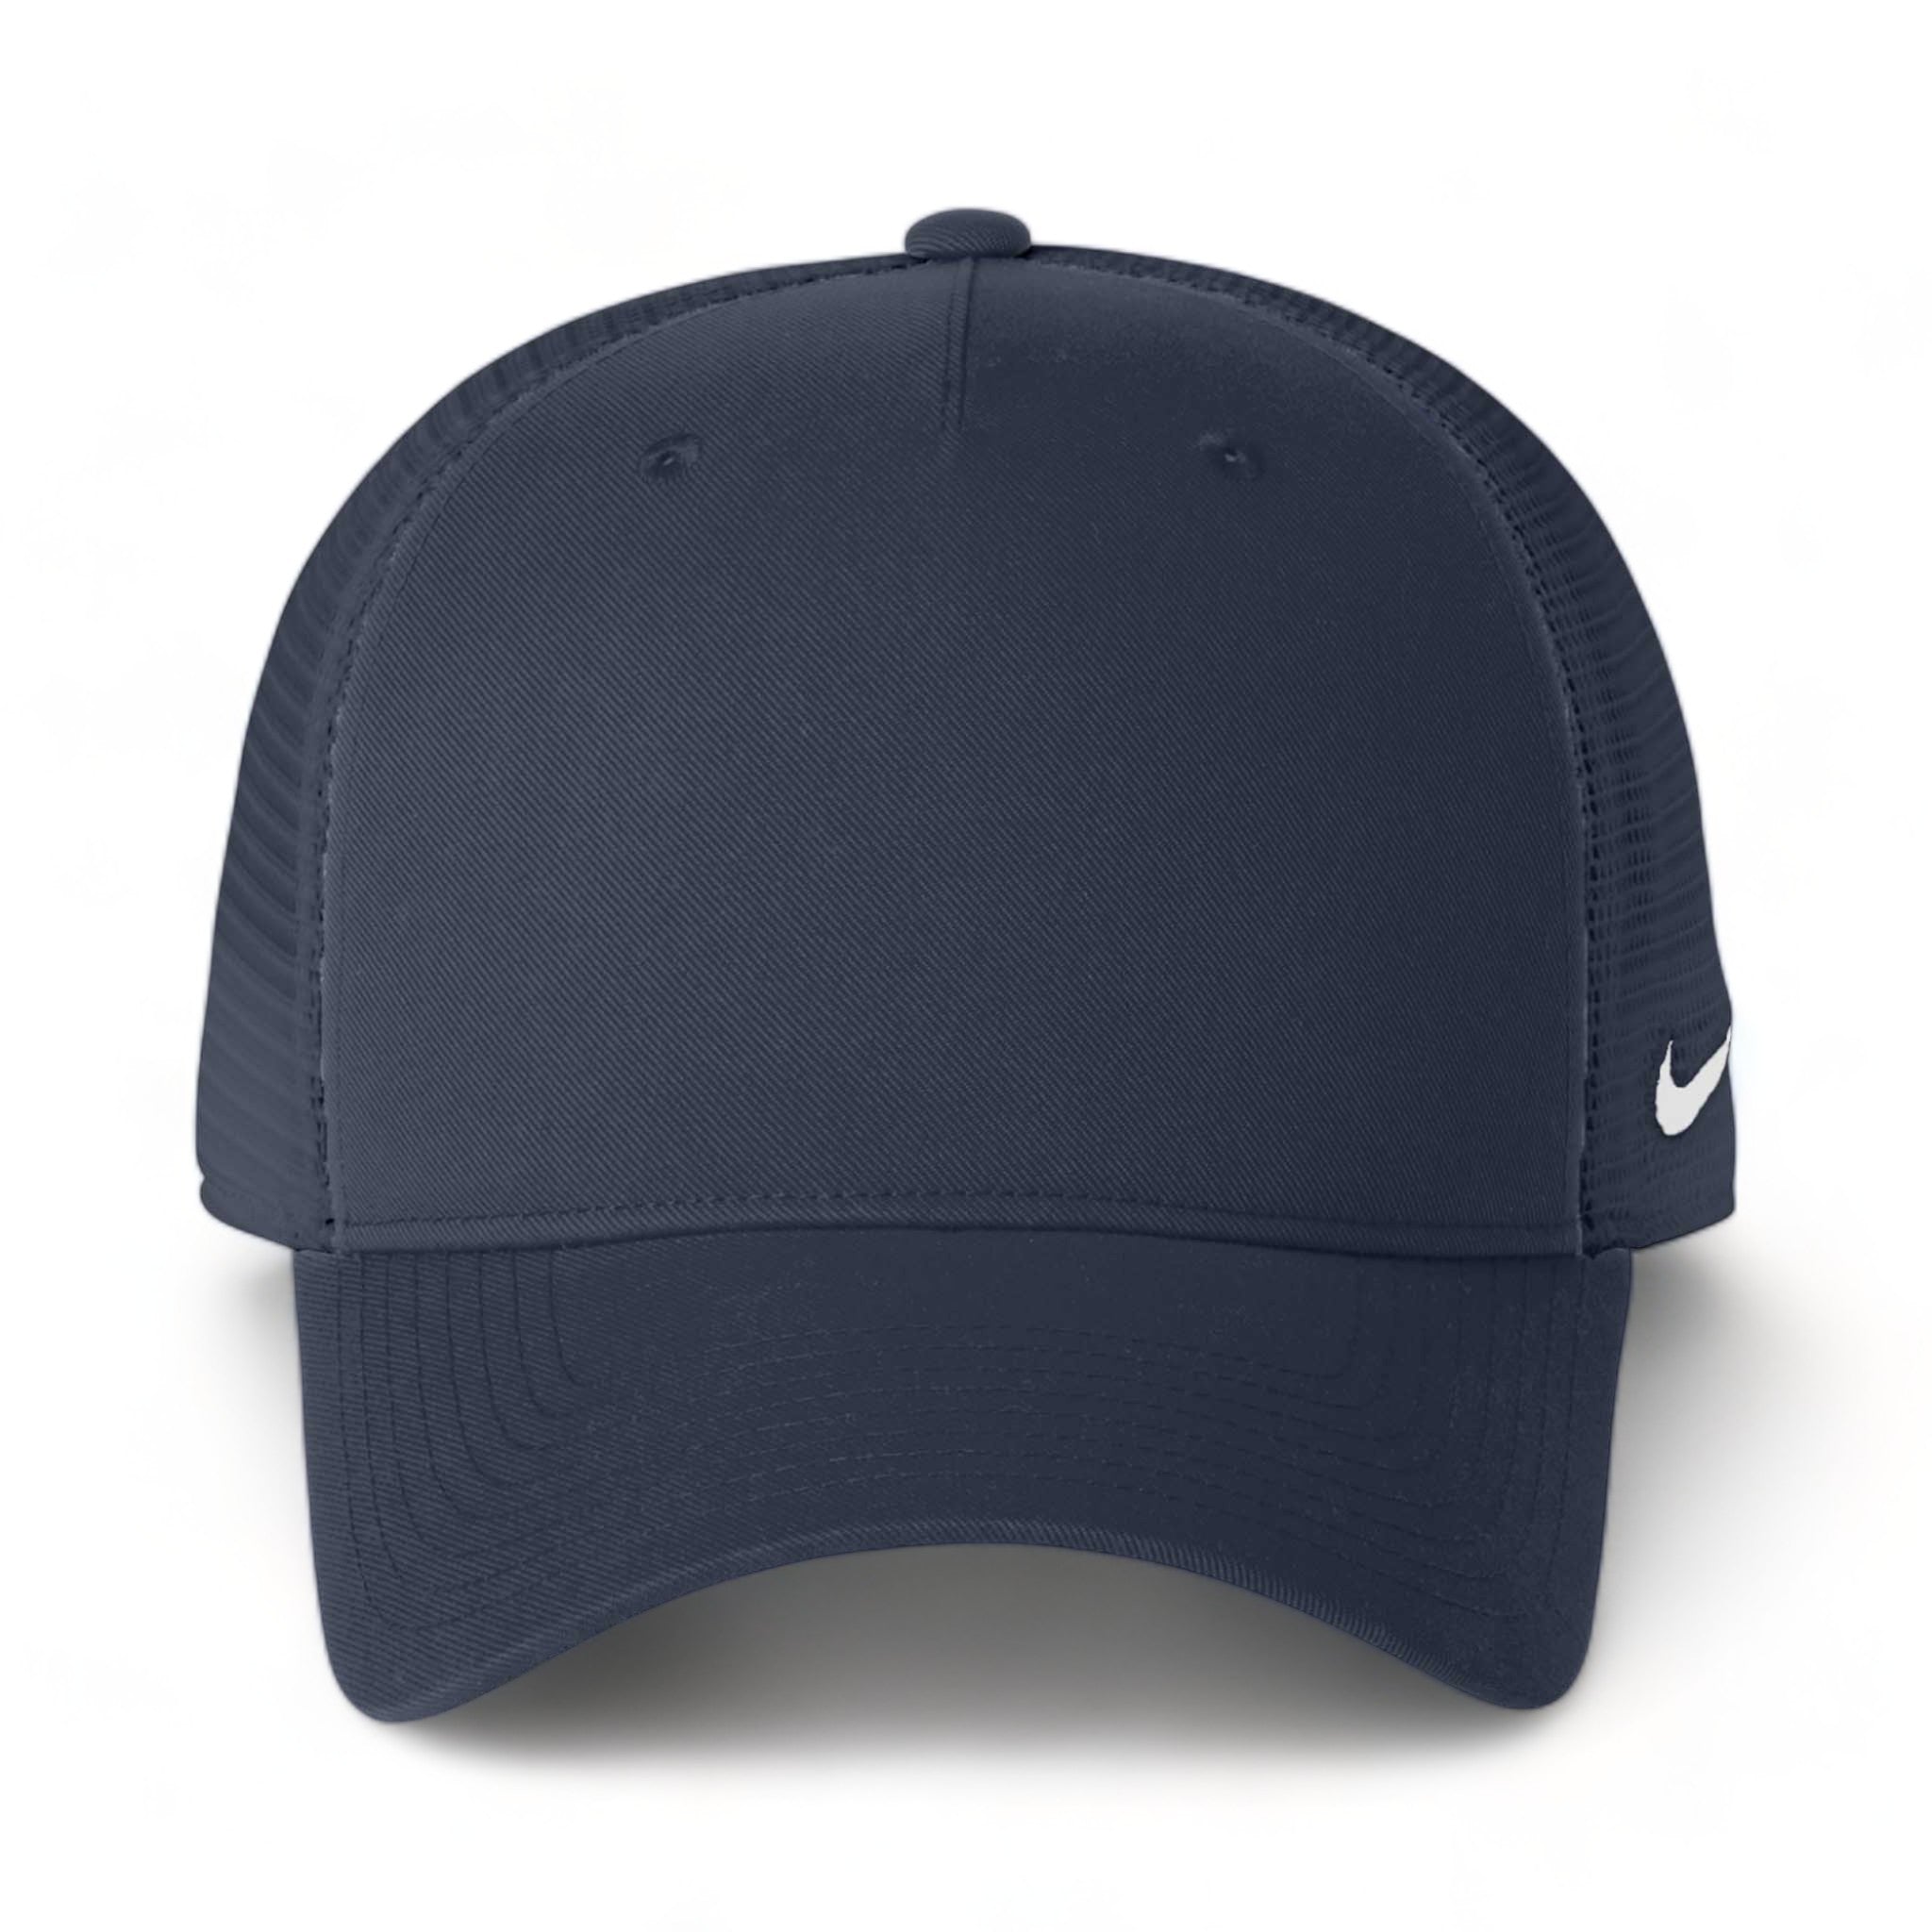 Front view of Nike NKFN9893 custom hat in navy and navy